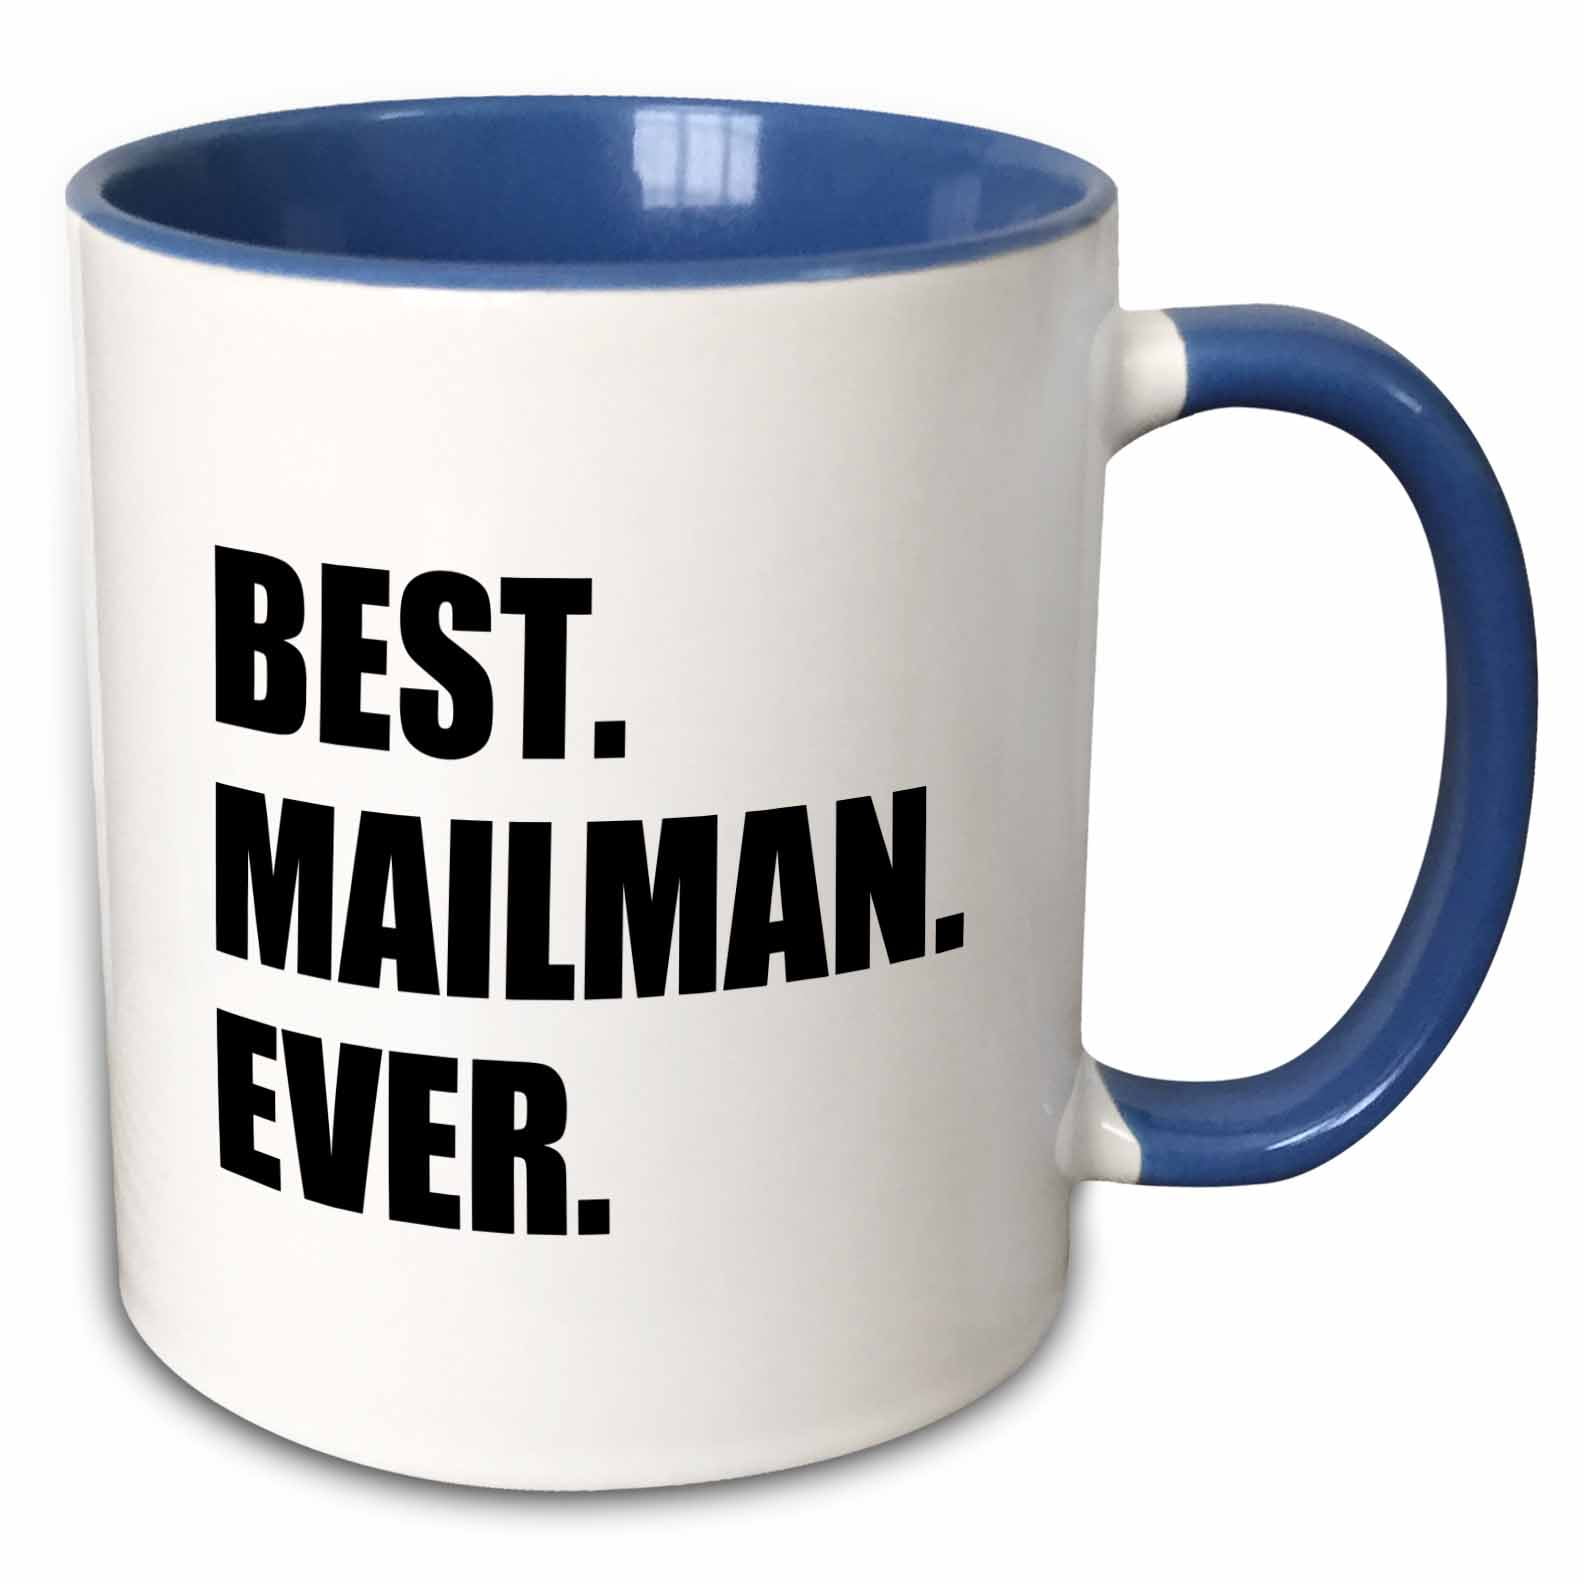 Best MAILMAN Ever Thank You for Your Hard Work Coffee Mug Mail Carrier Gift New